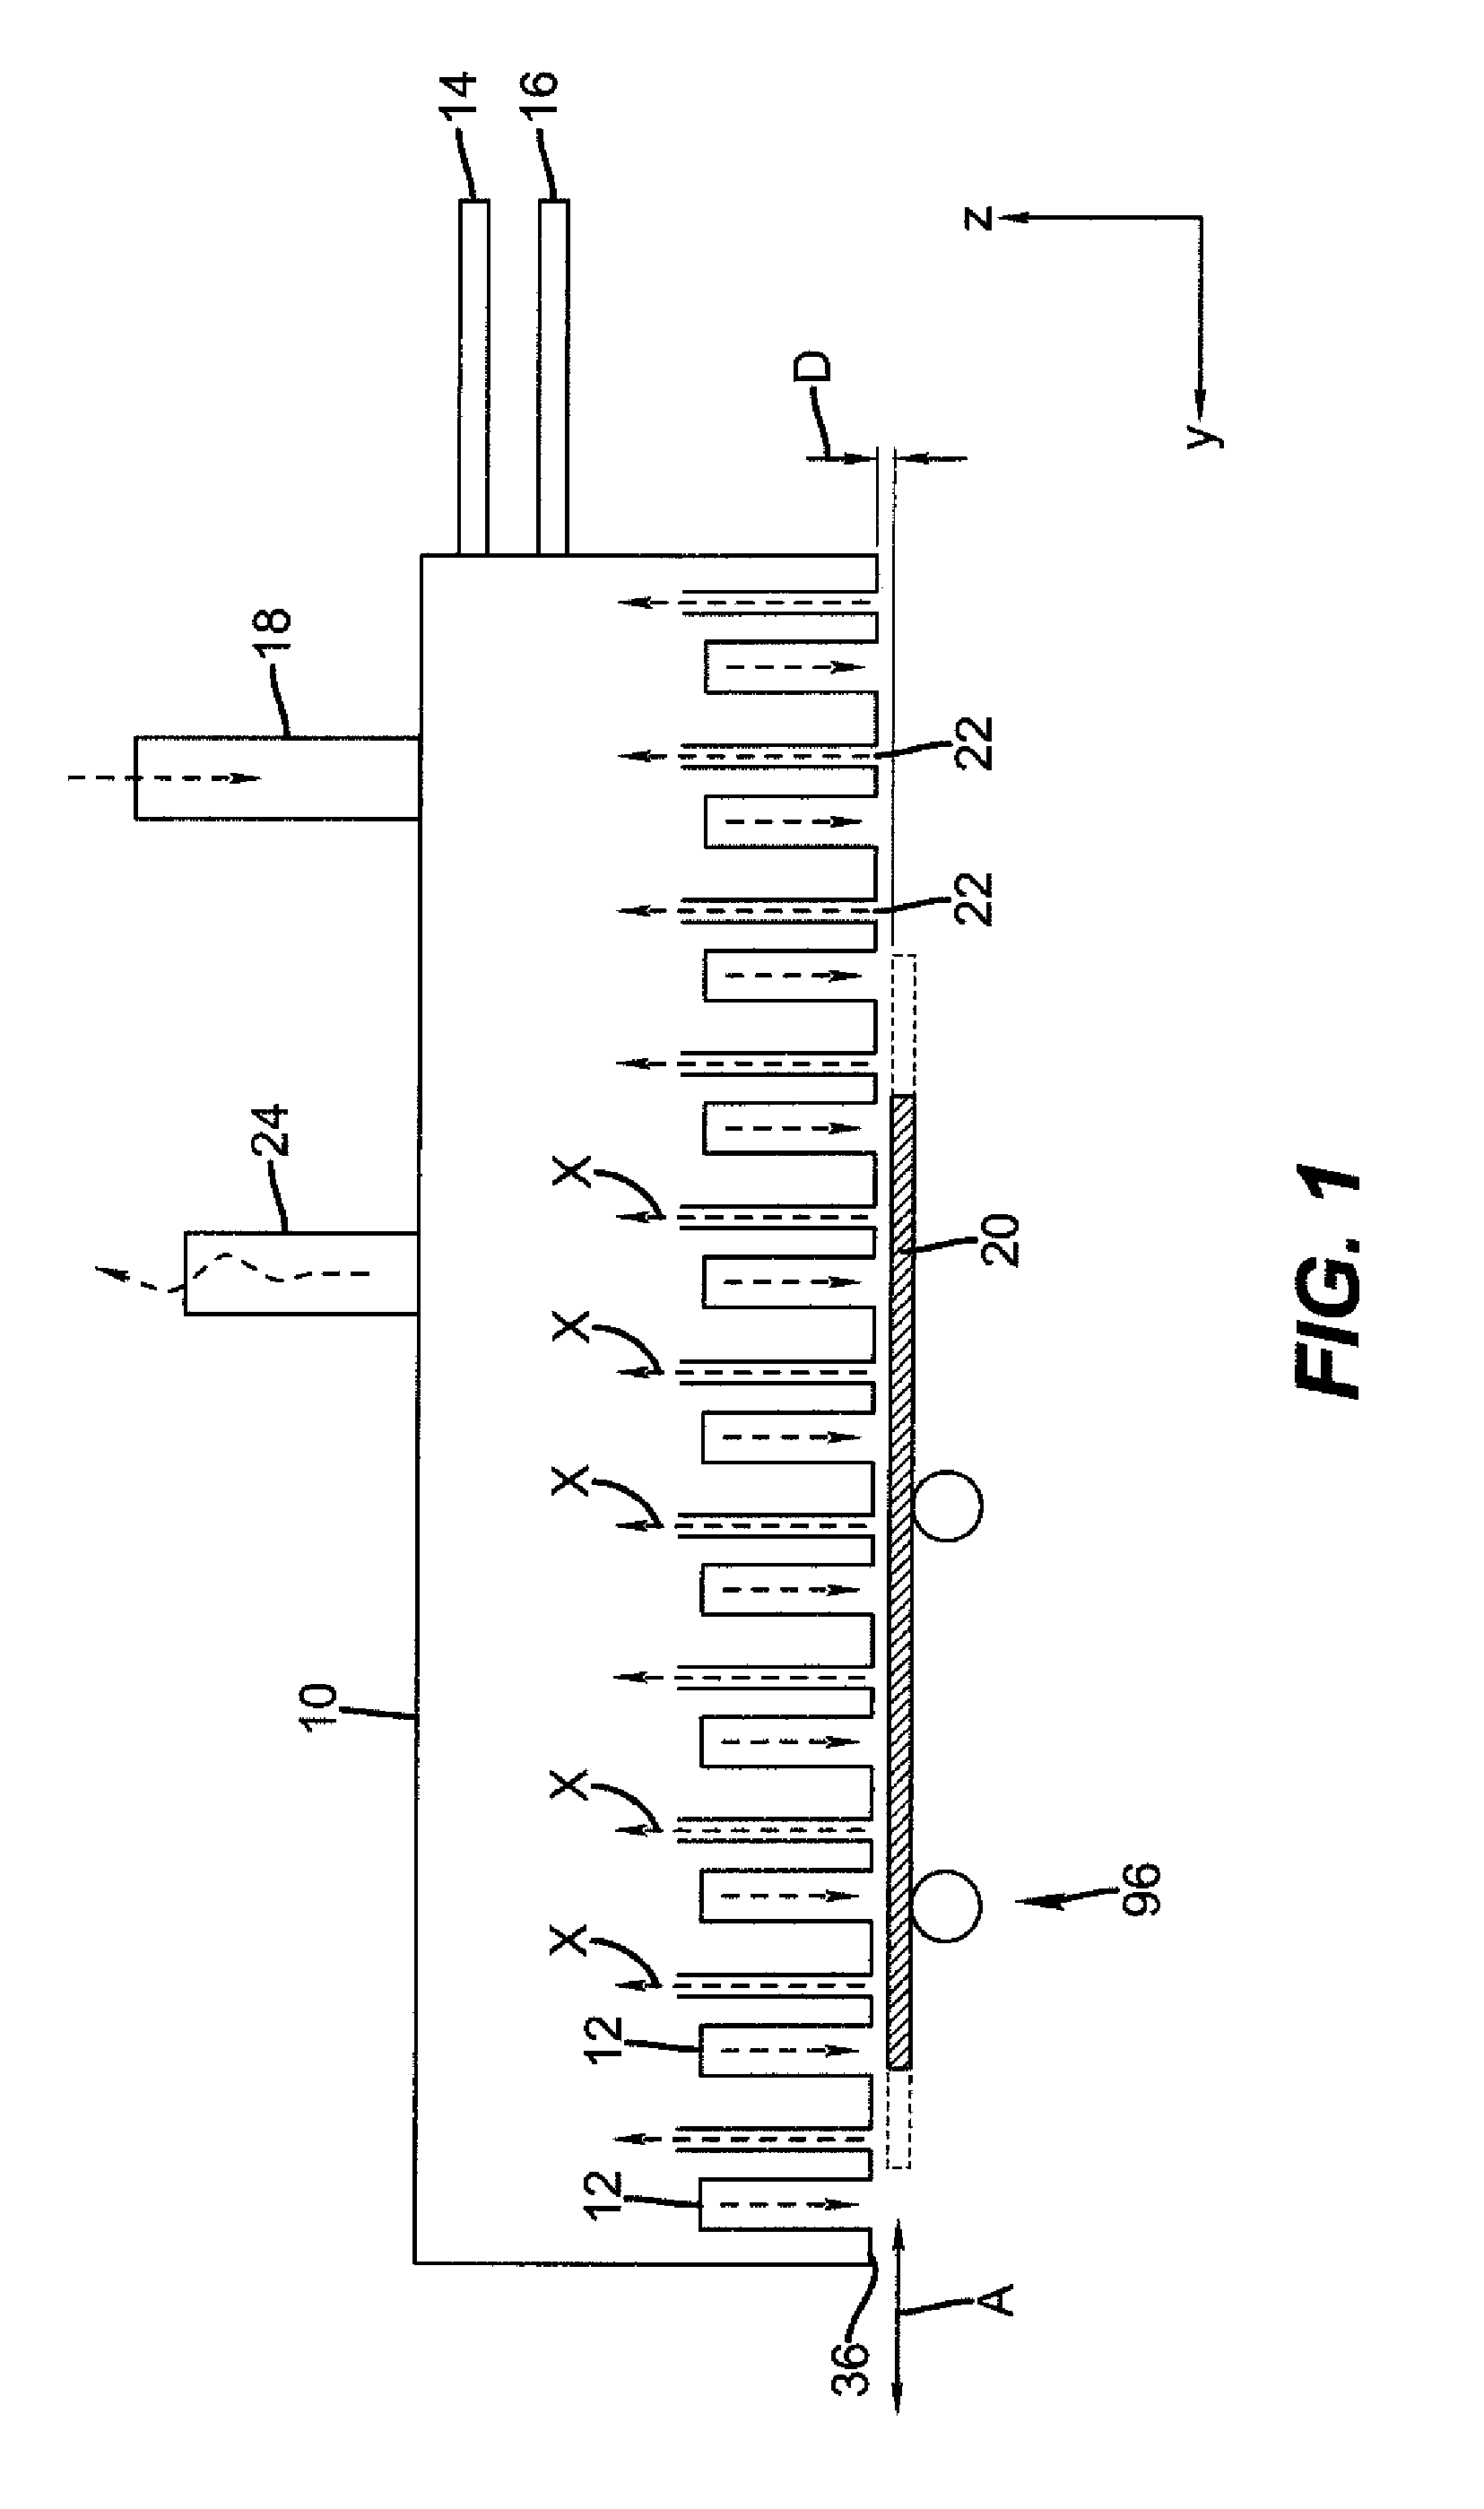 System for thin film deposition utilizing compensating forces